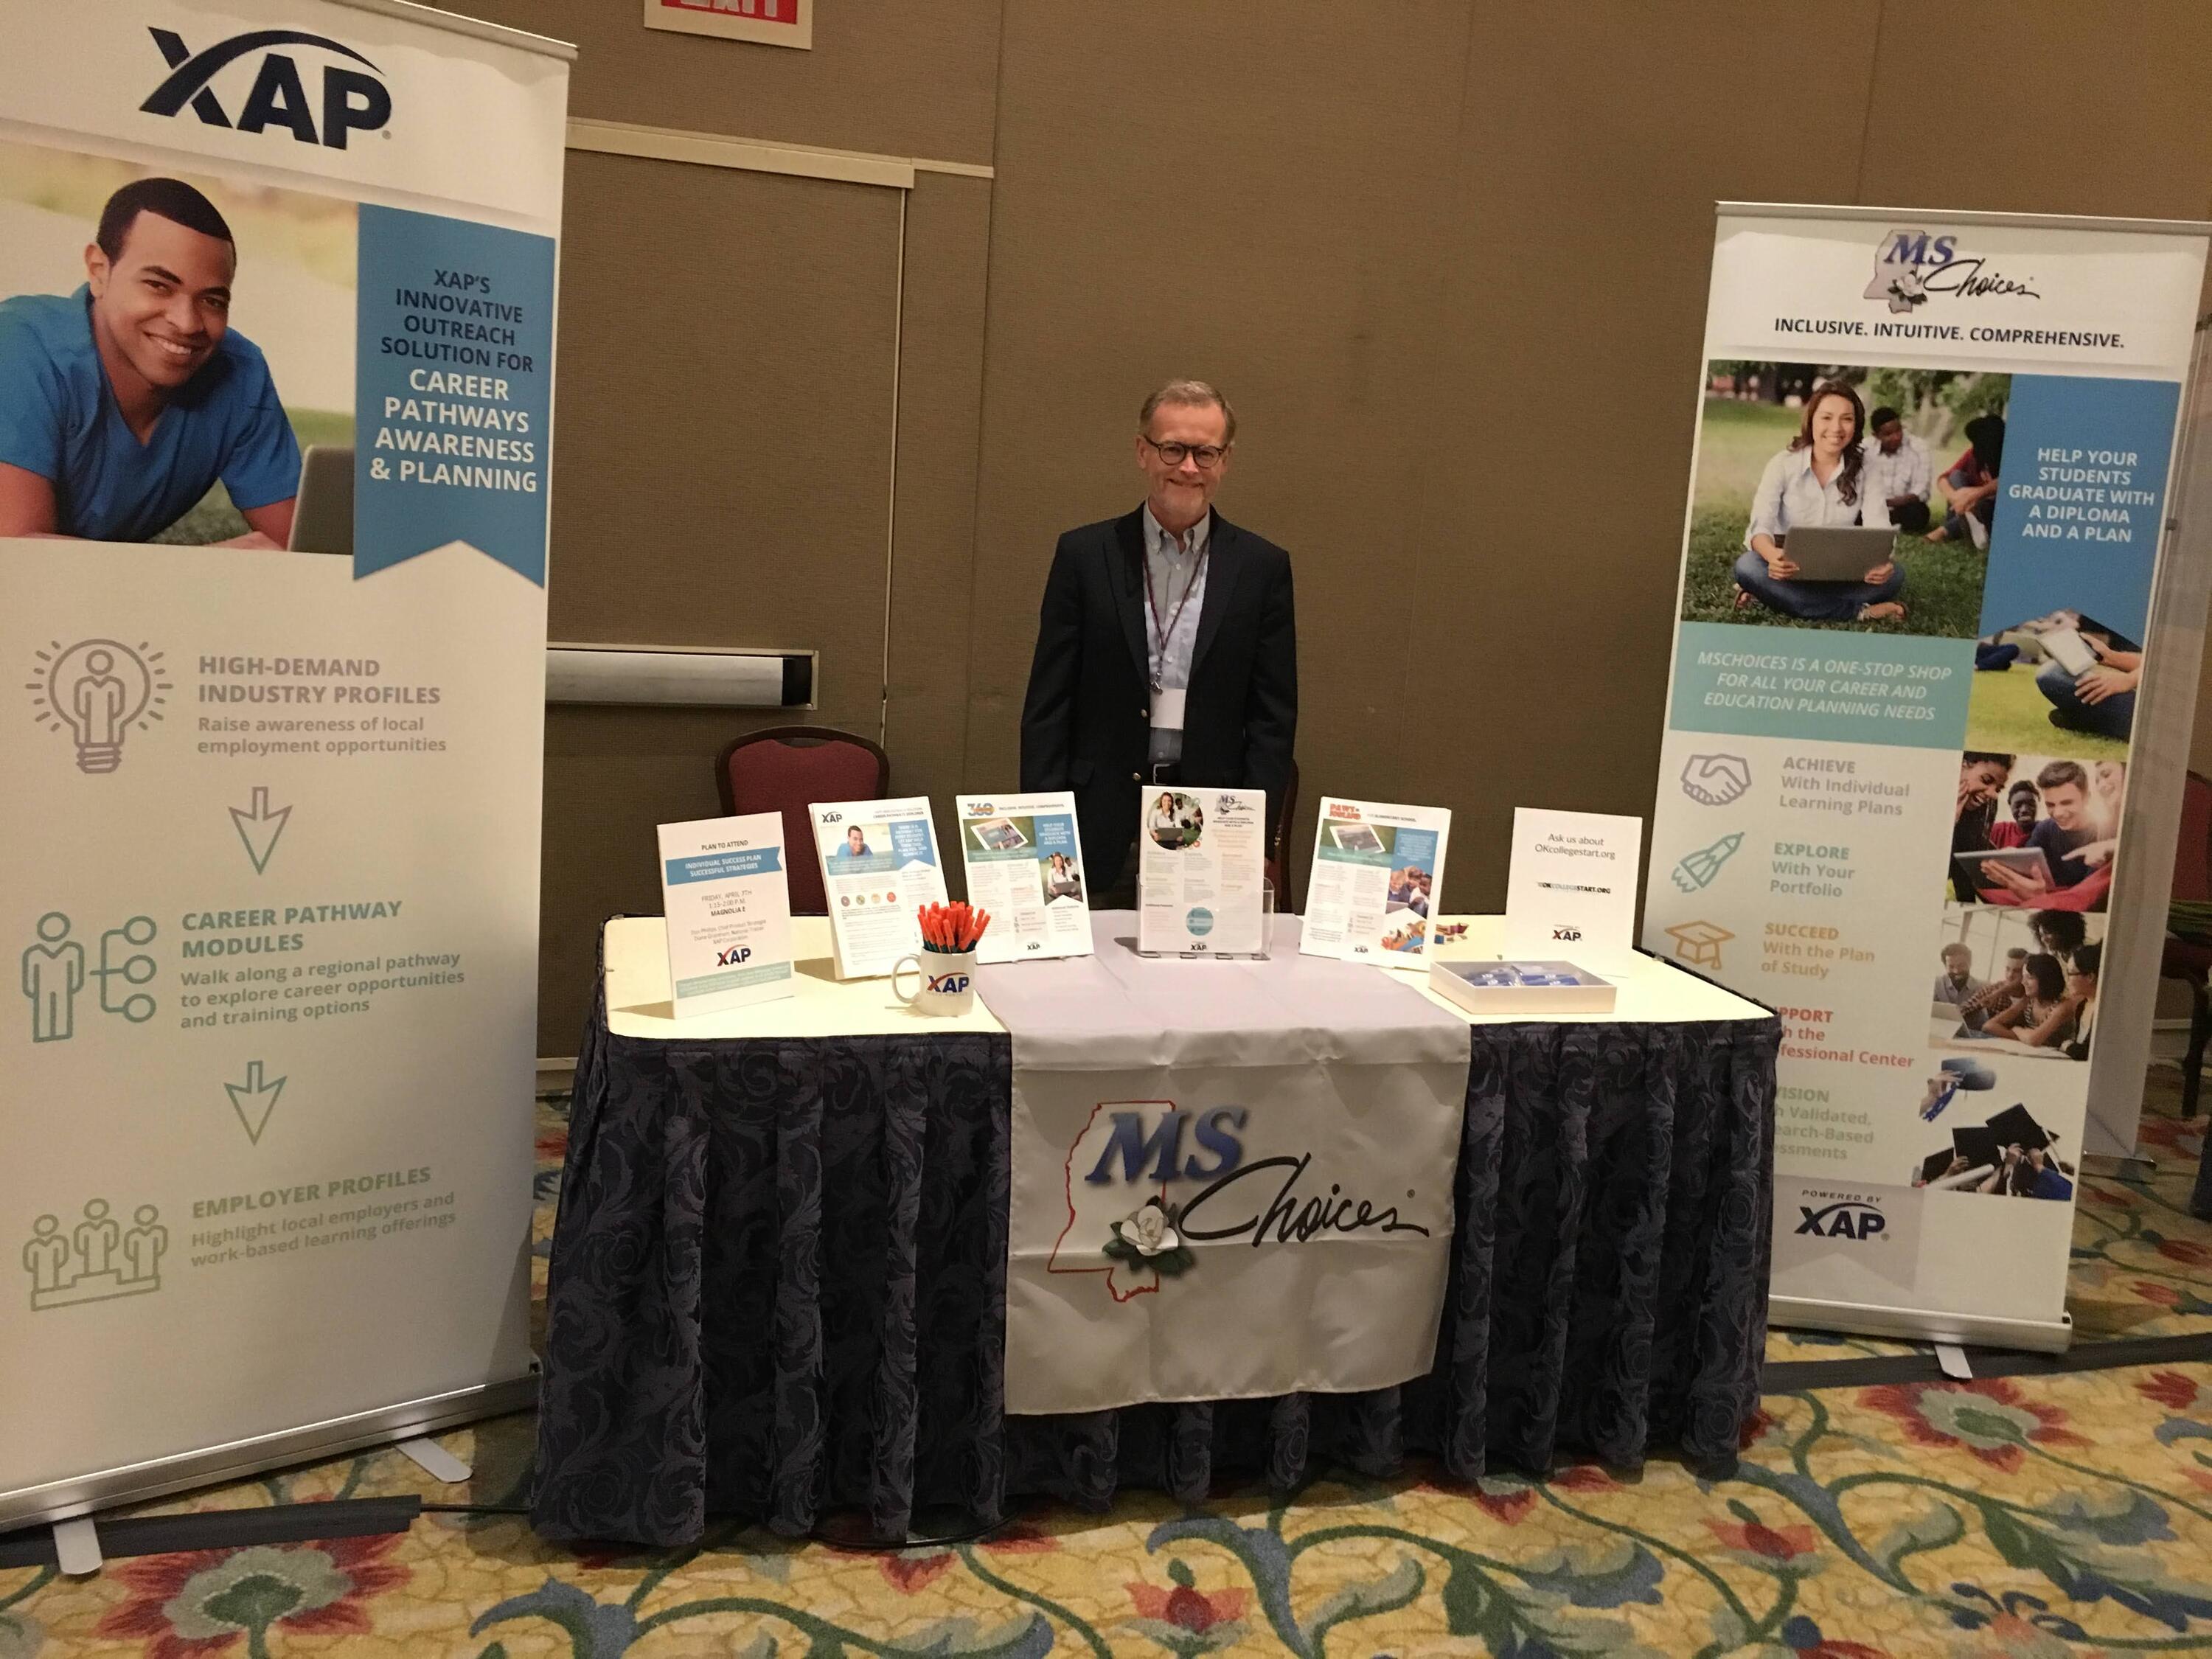 Don Phillips standing behind a booth for XAP Corporation